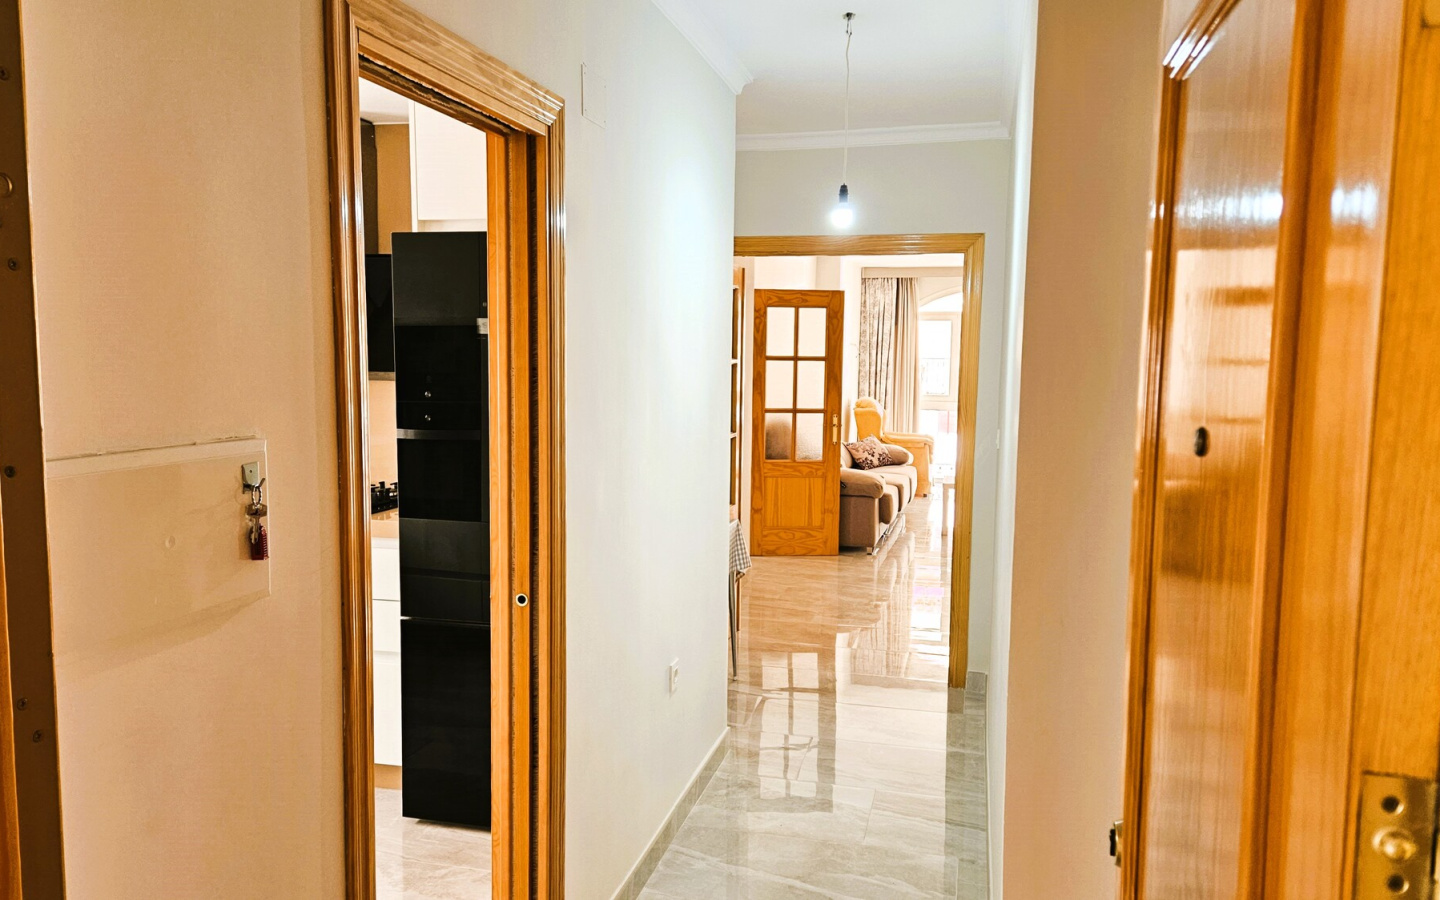 Salobreña. Two-bedrooms apartment with lift